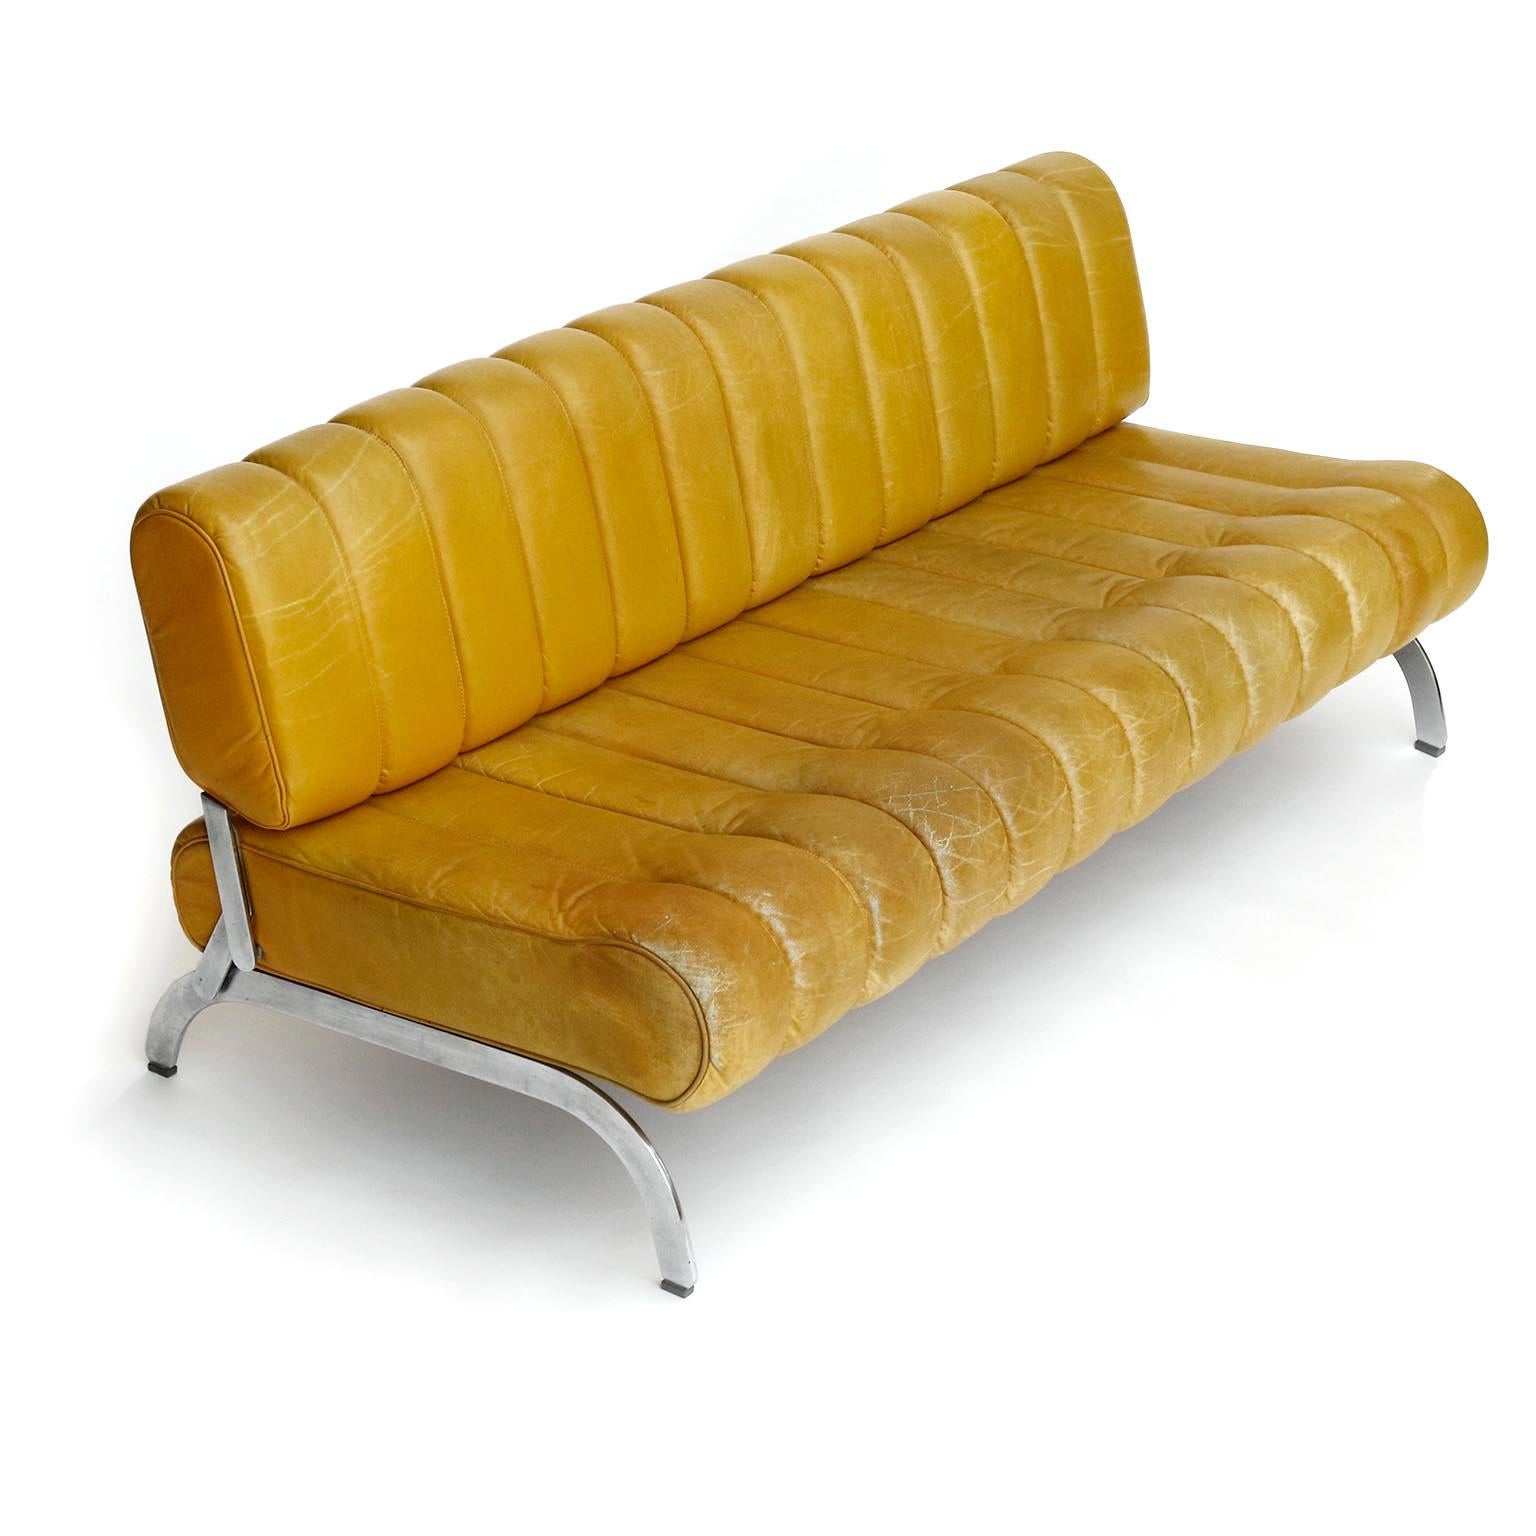 Austrian Karl Wittmann Sofa Daybed Independence, Patinated Yellow Leather, Austria, 1970s